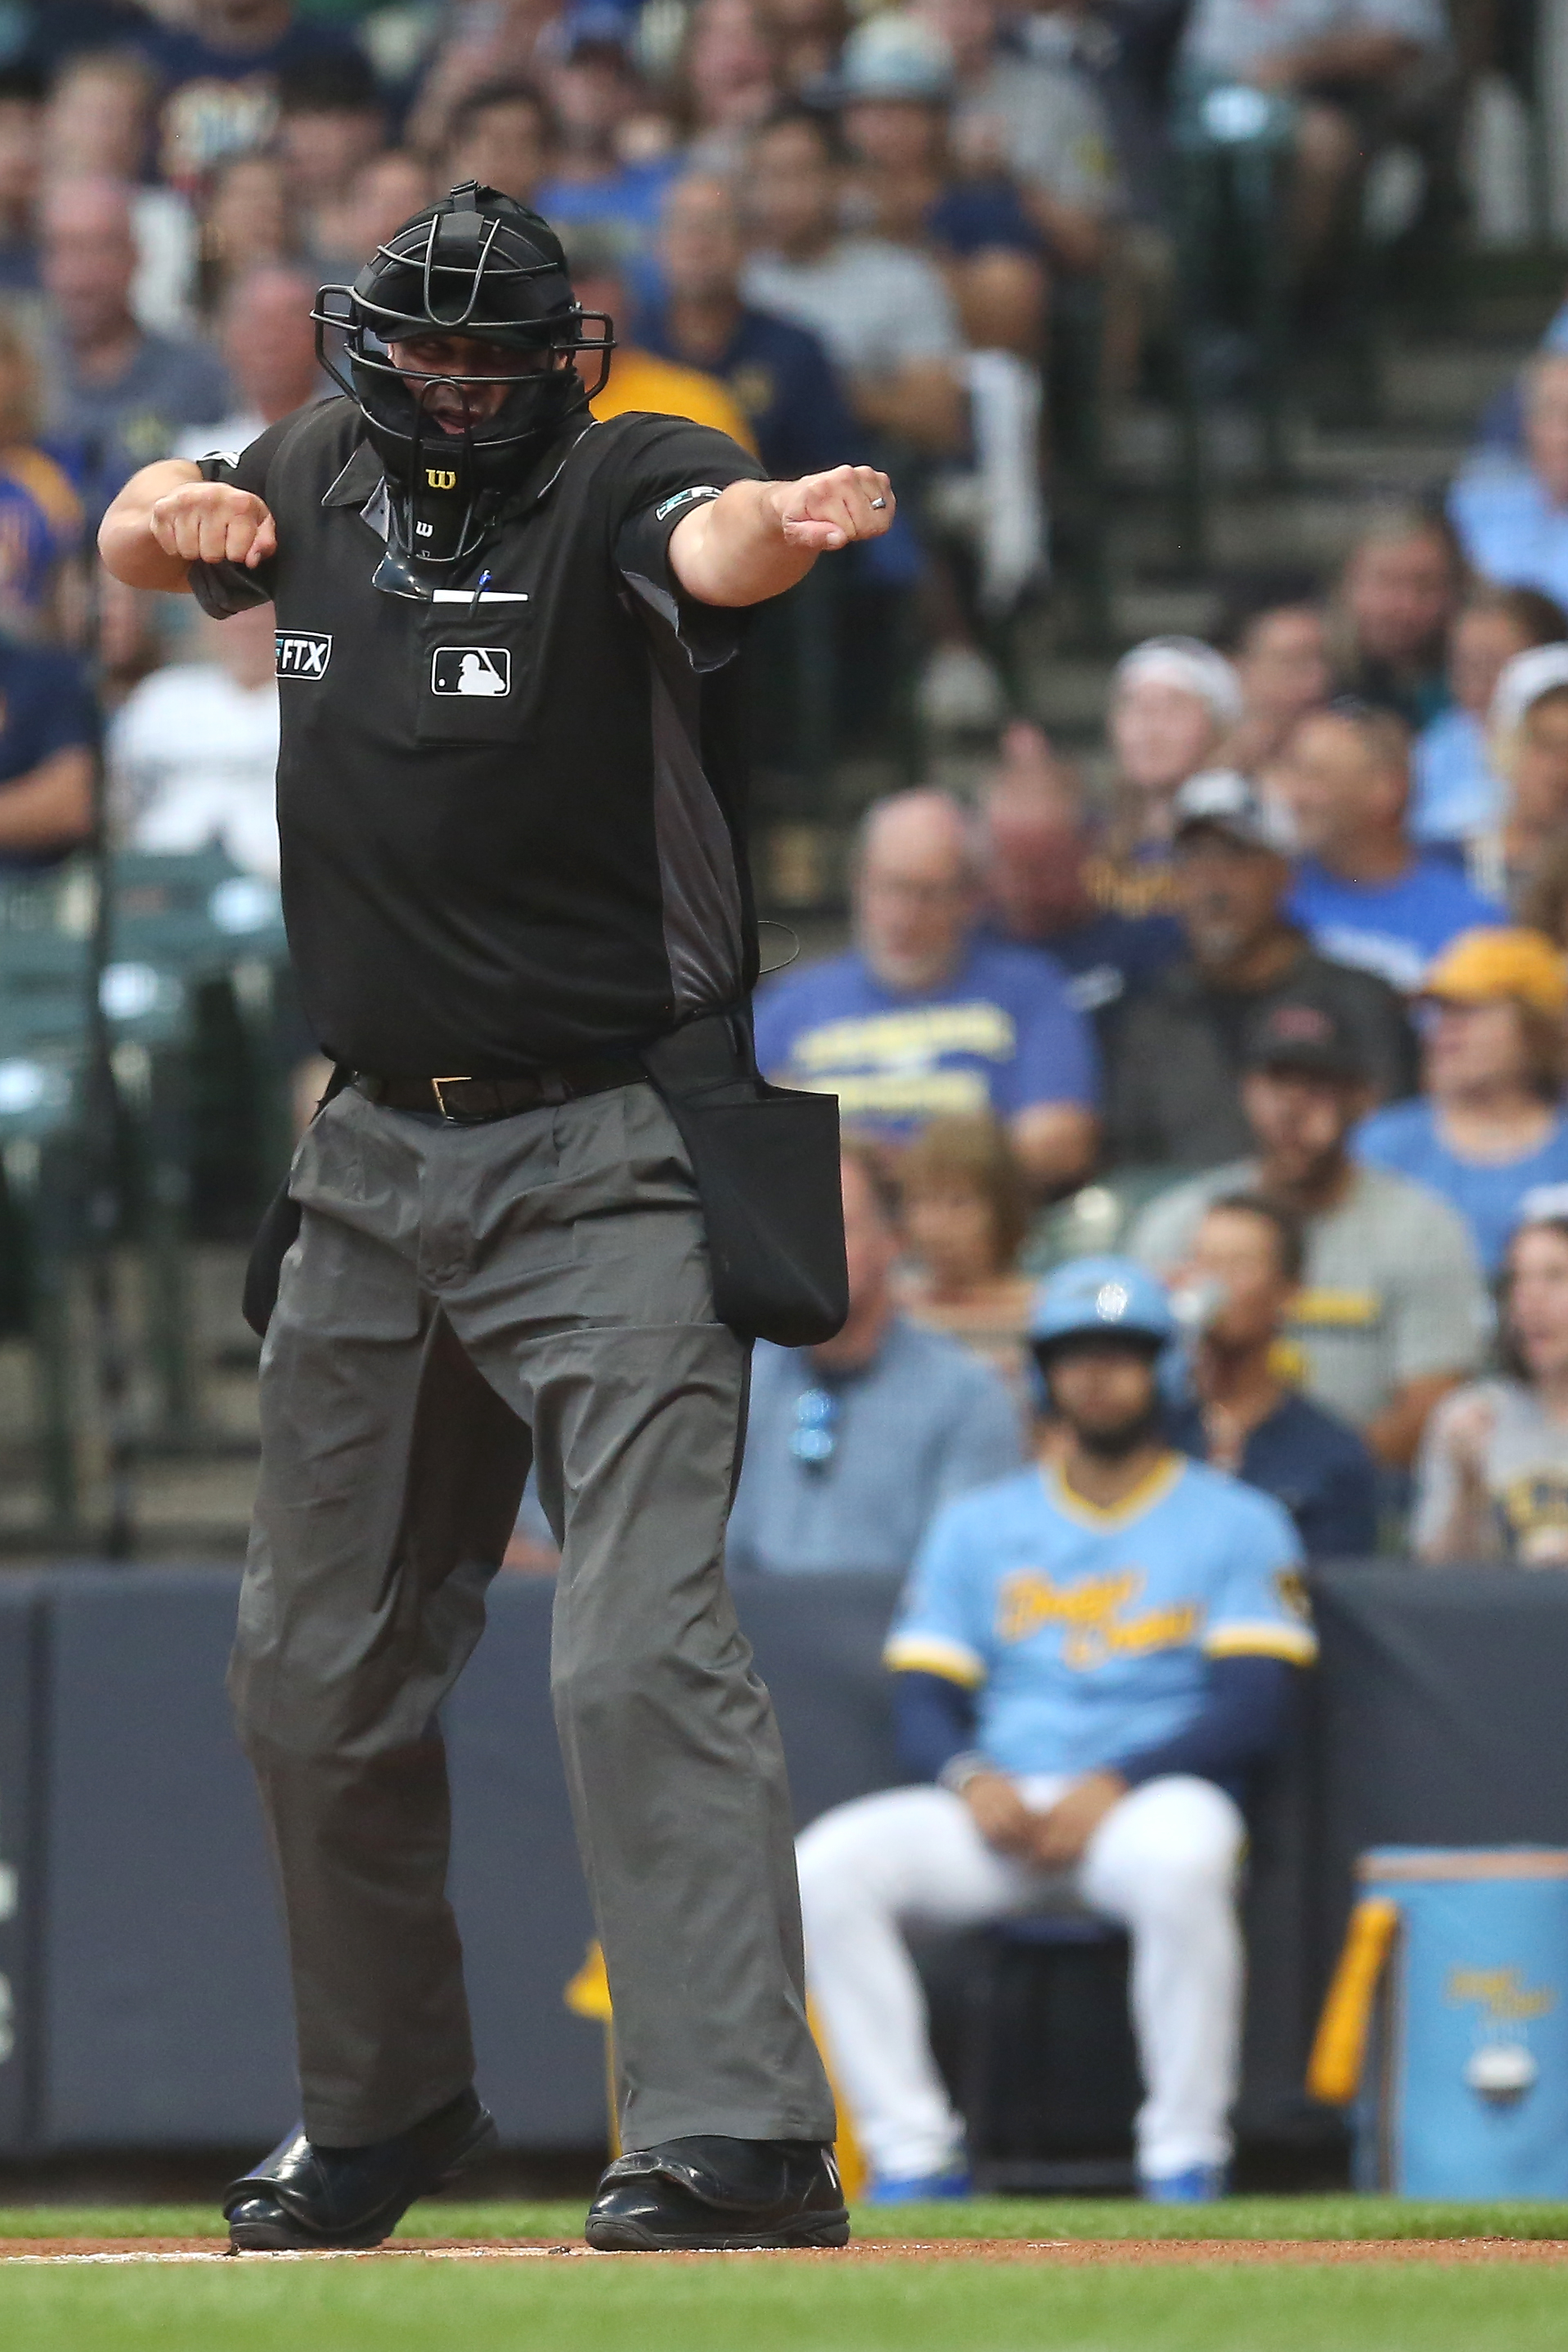 MLB: AUG 30 Pirates at Brewers